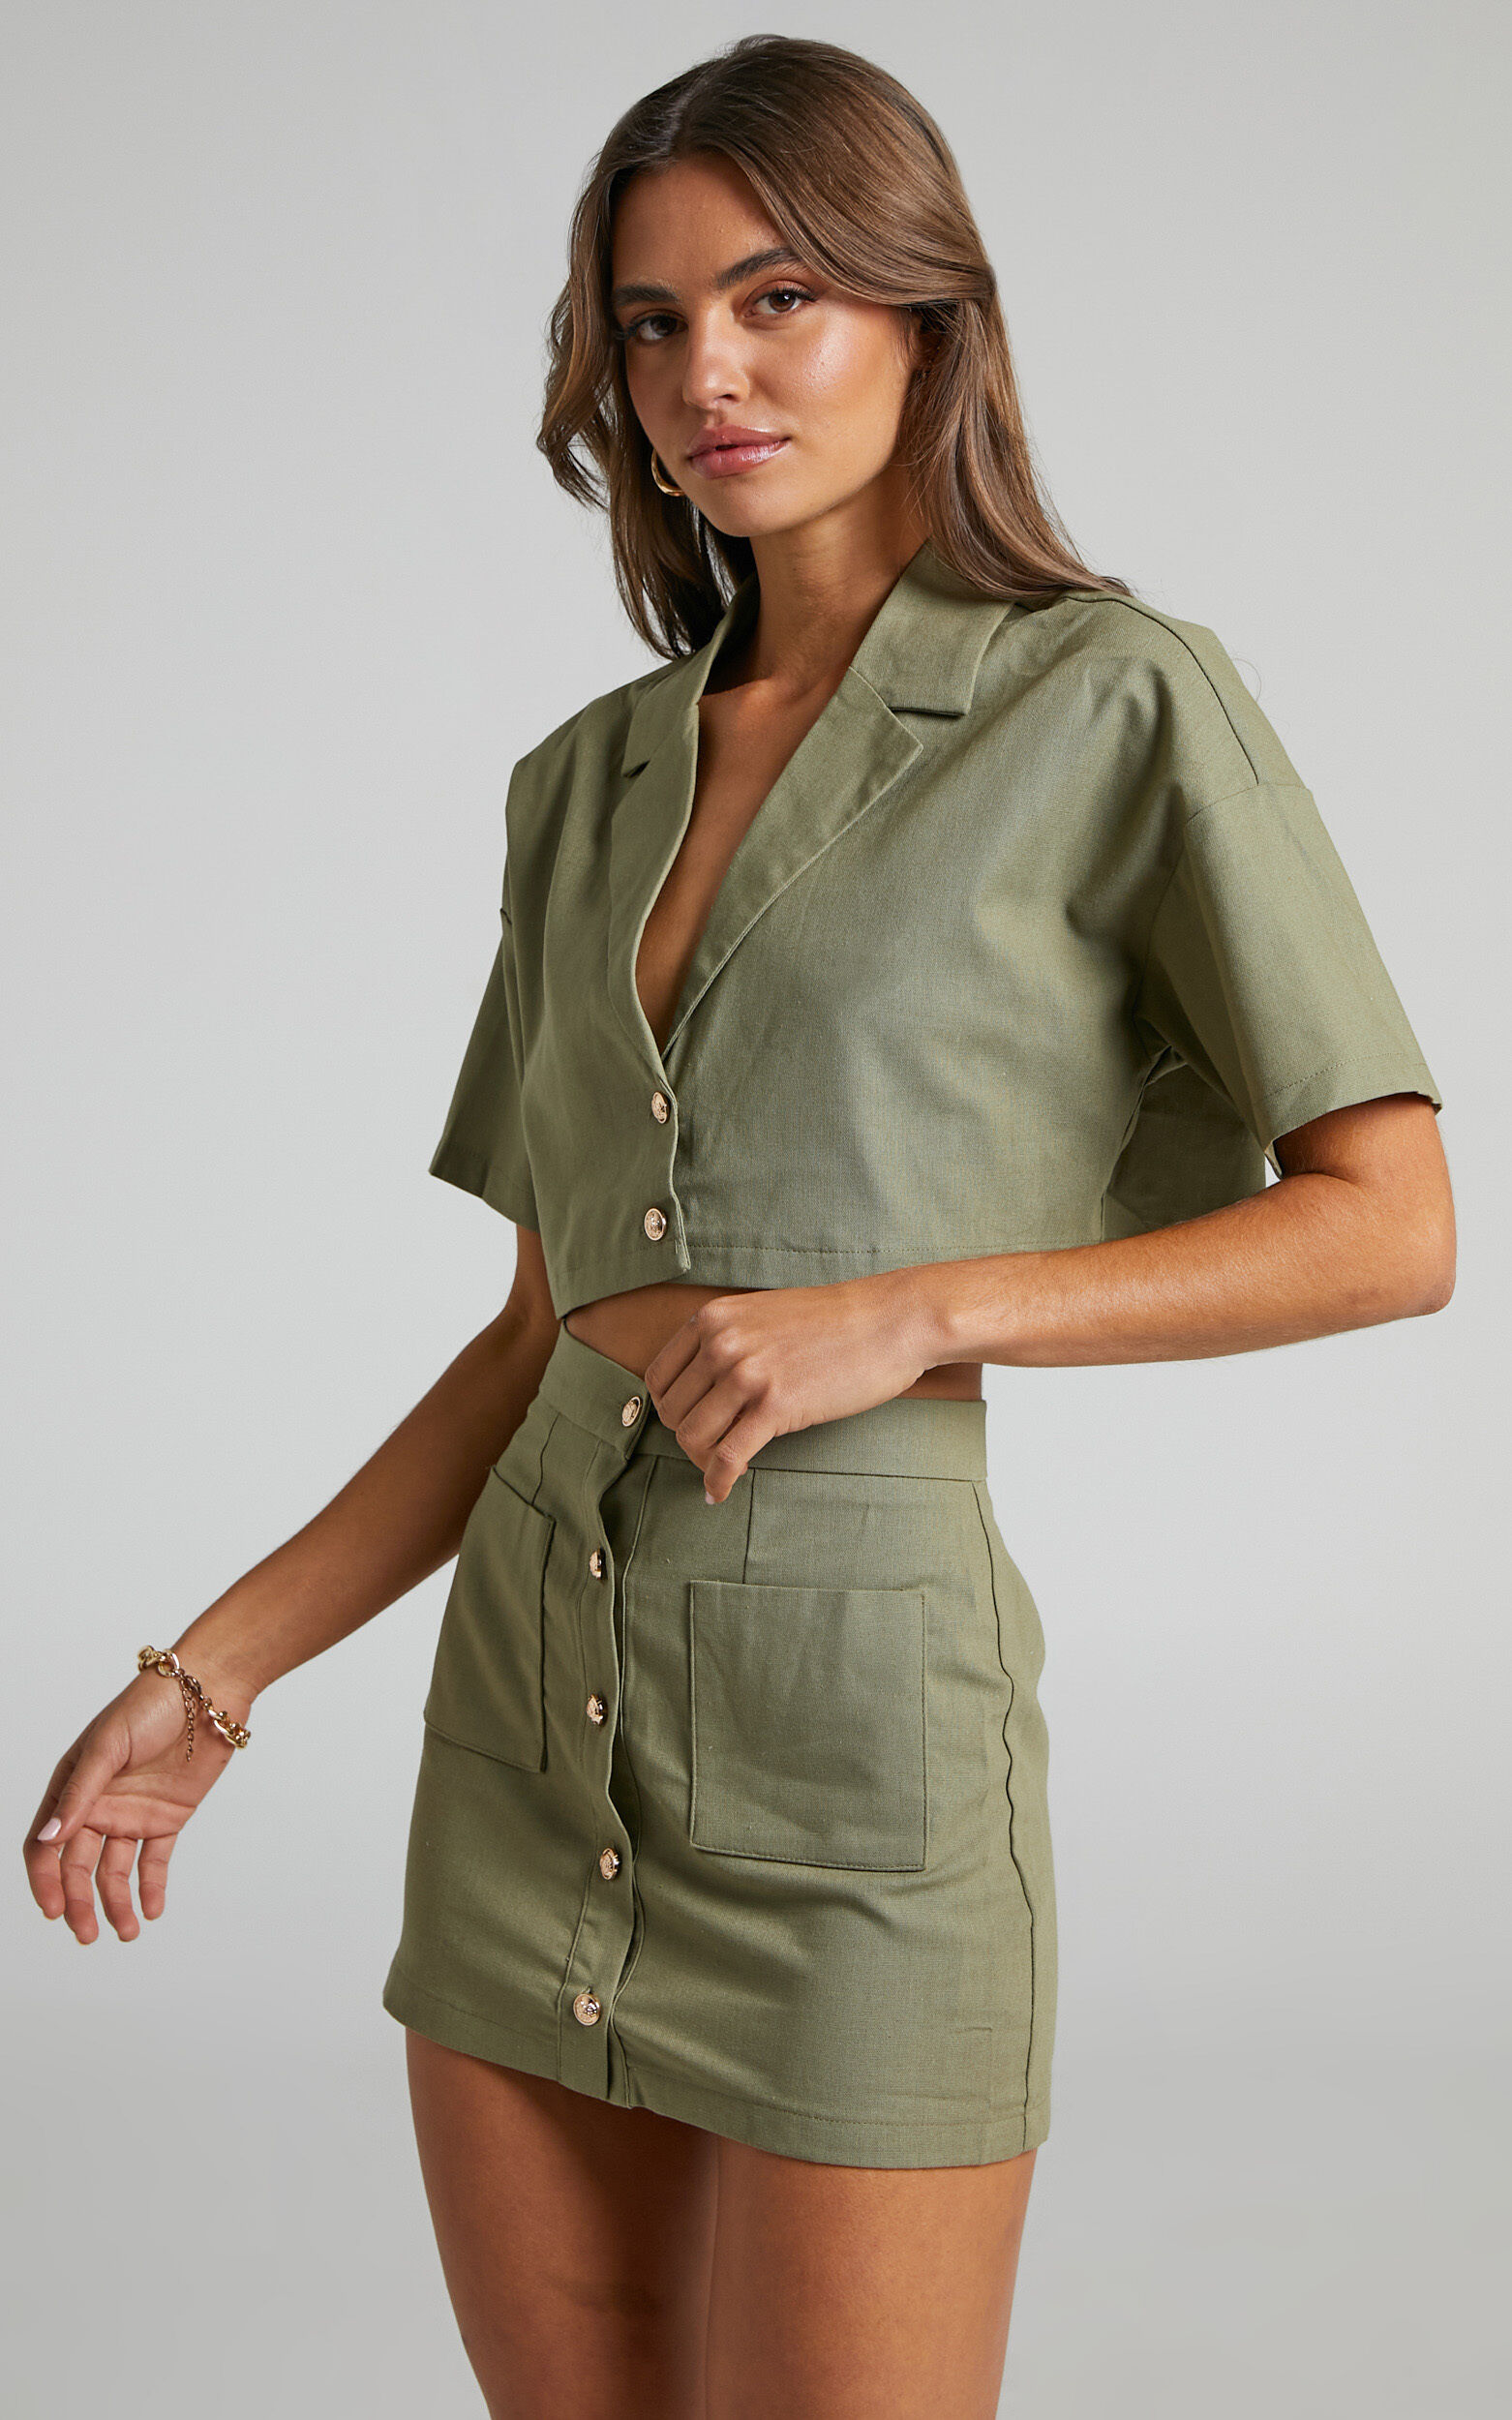 Nadhia Cropped Shirt and Button Up Mini Skirt Two Piece Set in Khaki - 04, GRN1, super-hi-res image number null